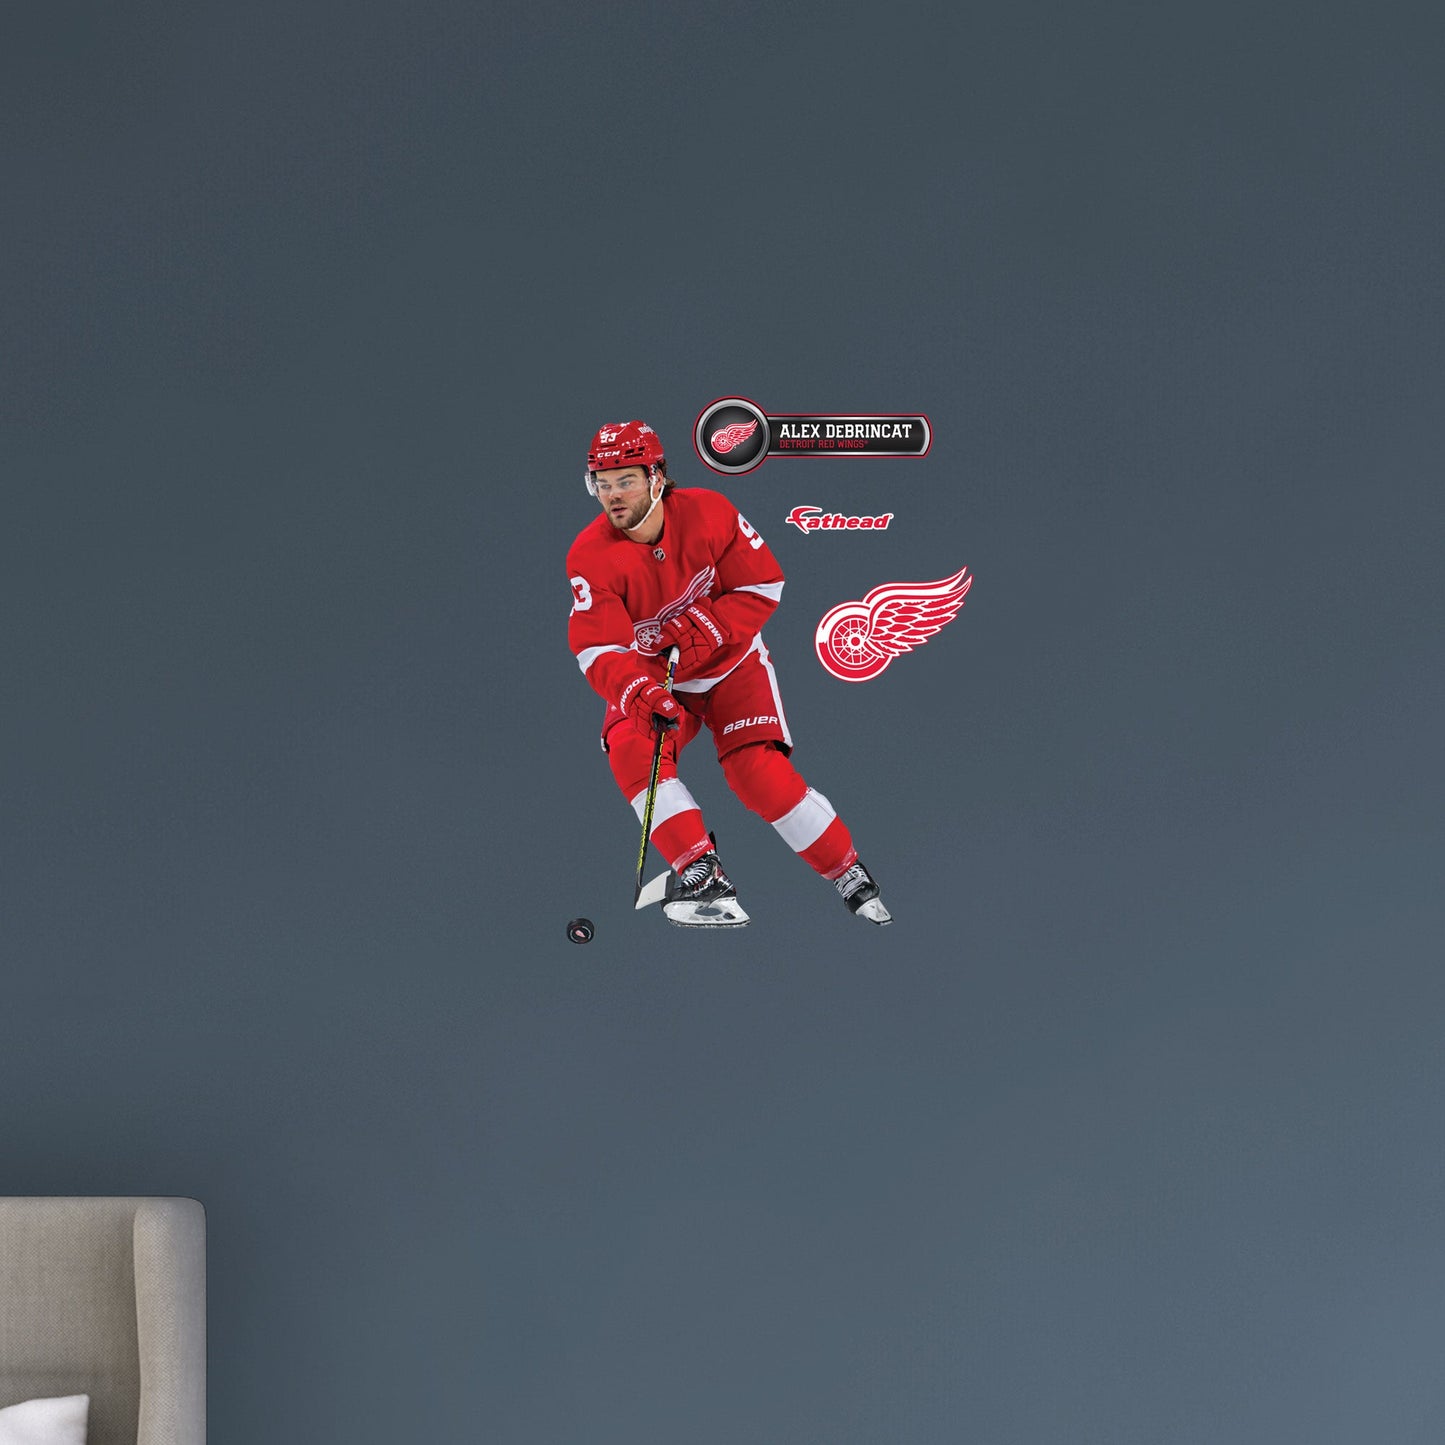 Detroit Red Wings: Alex DeBrincat         - Officially Licensed NHL Removable     Adhesive Decal